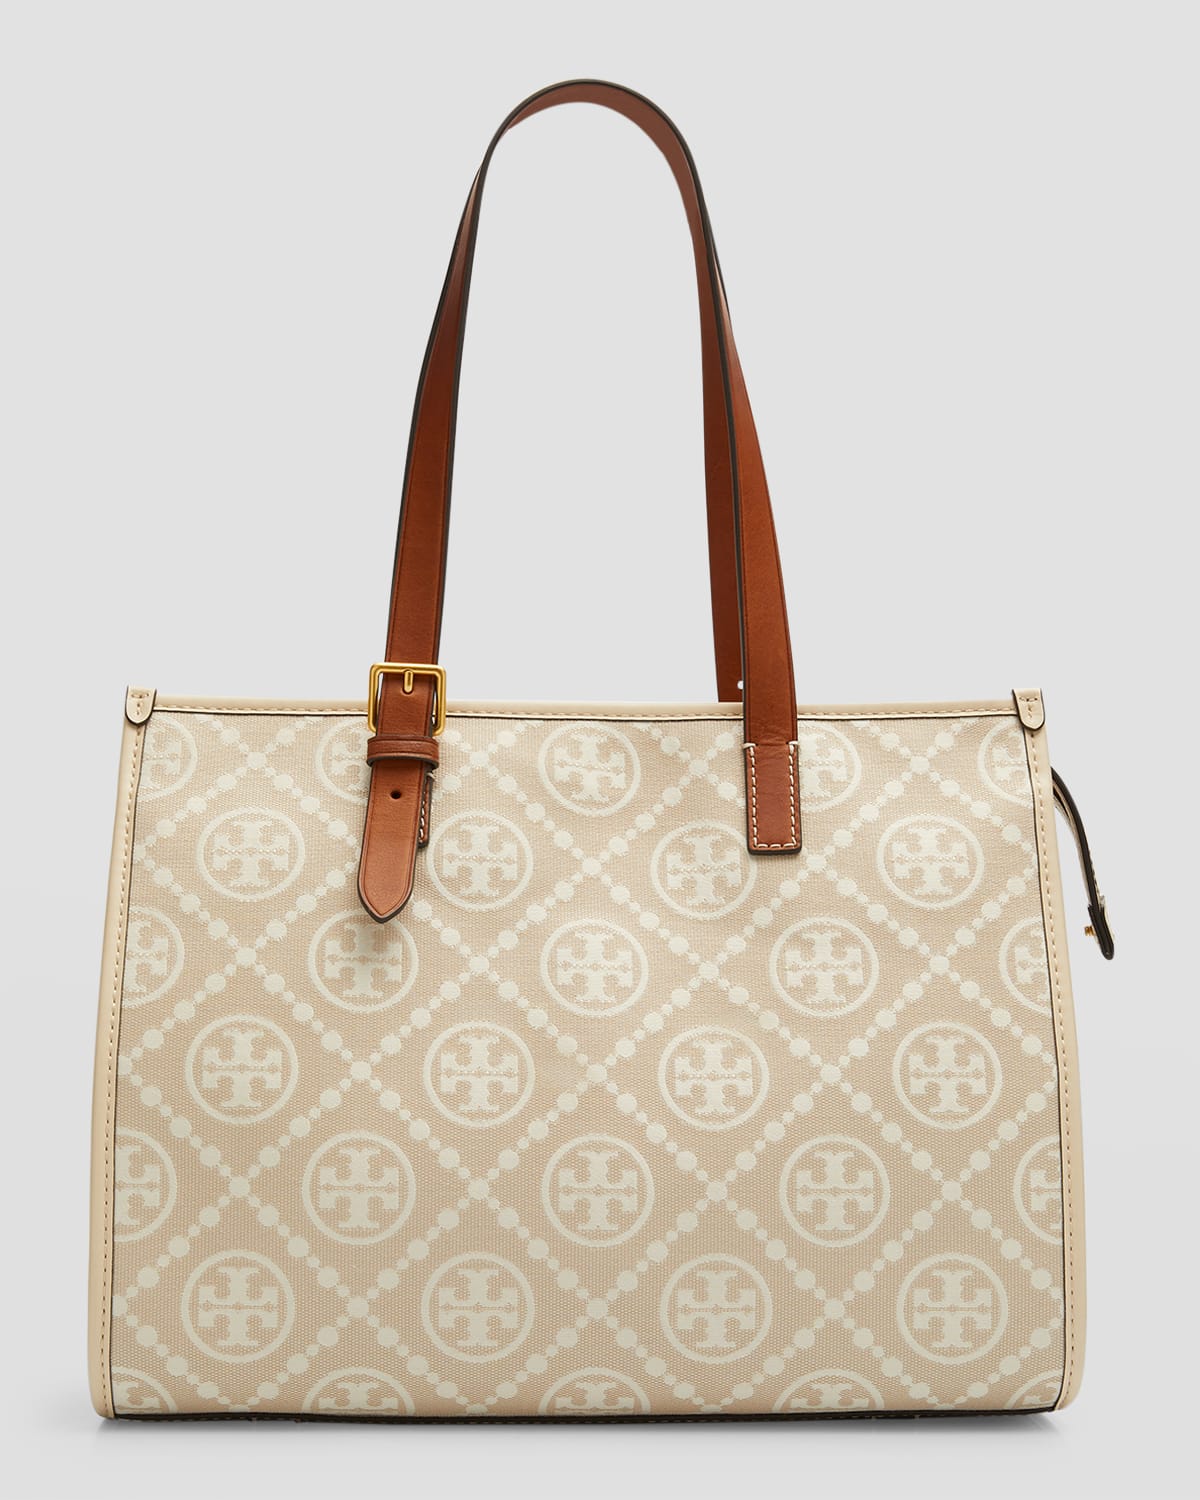 Tory Burch Tory Burch T Monogram Tote Bag 81964263 PVC coated canvas Ivory  NEW unisex 81964263｜Product Code：2101216283688｜BRAND OFF Online Store